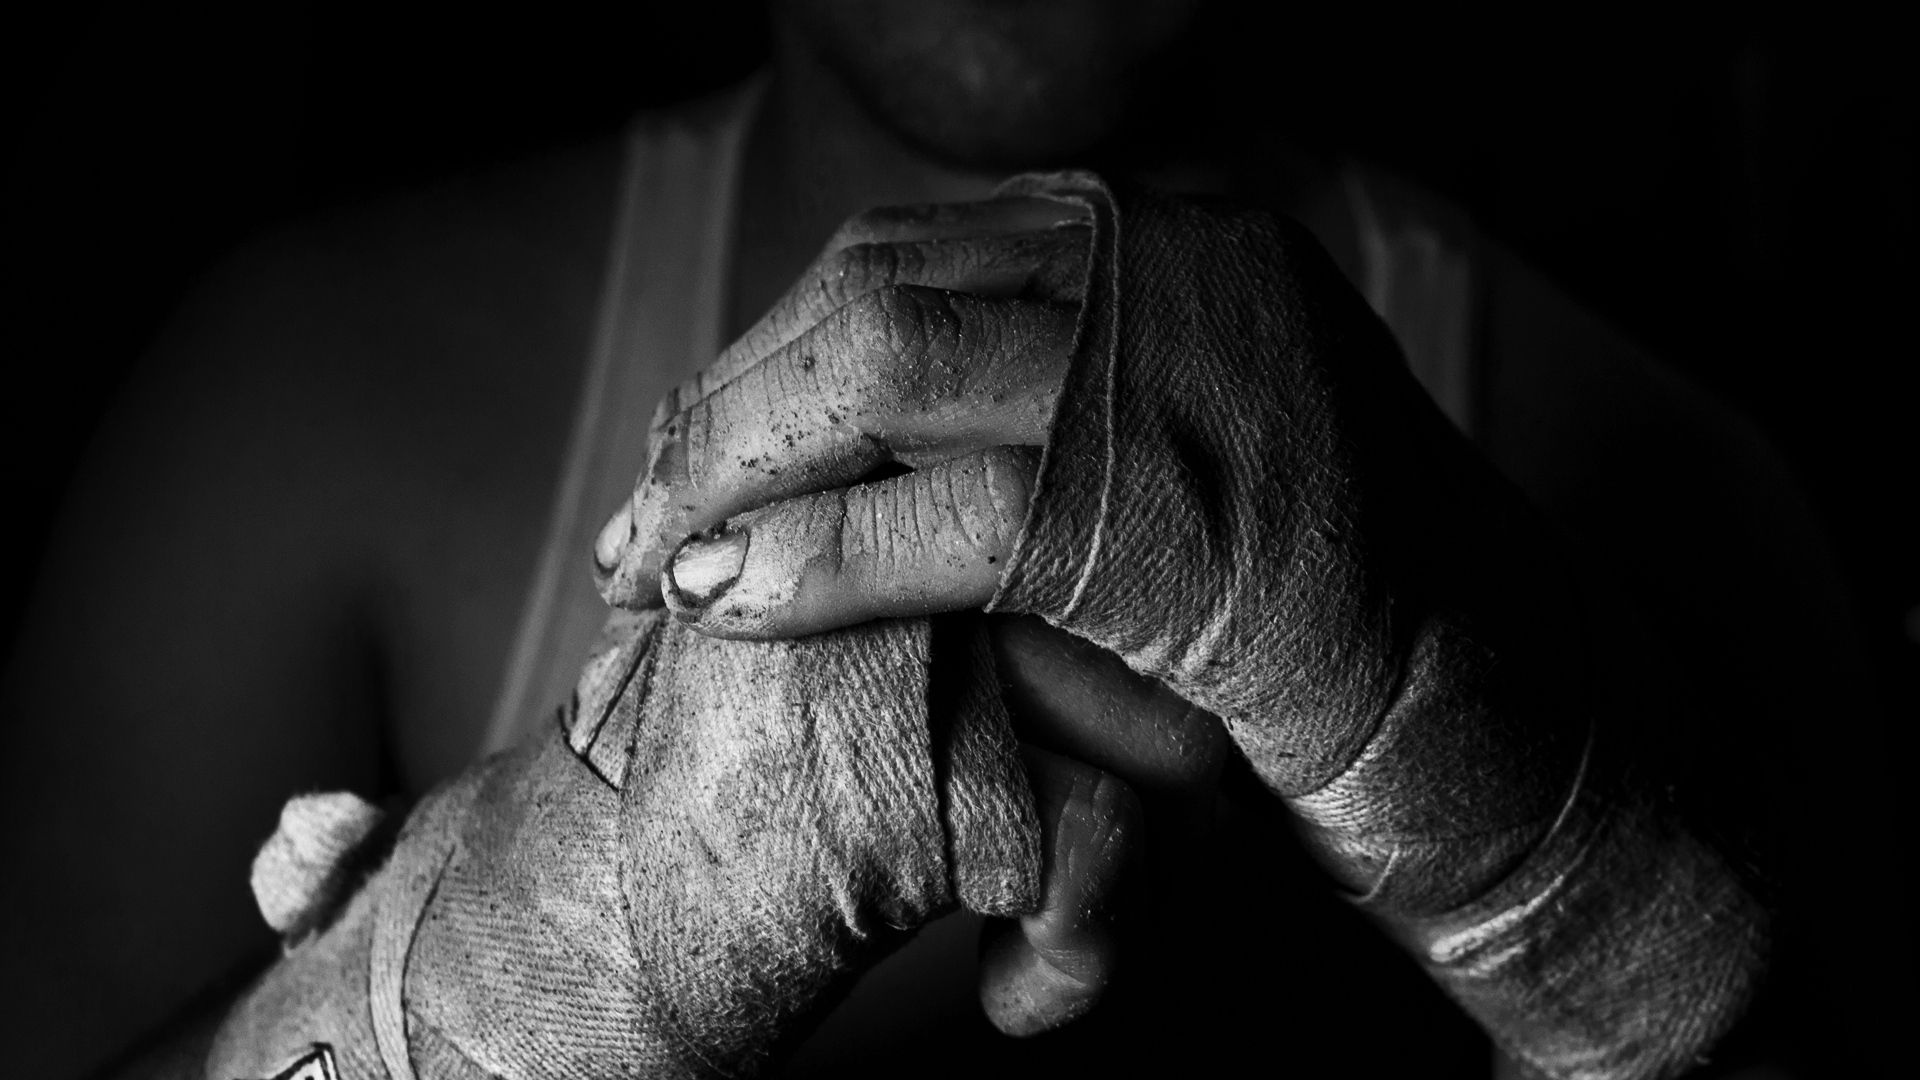 sports, hands, bw, chb, fighter, bandages